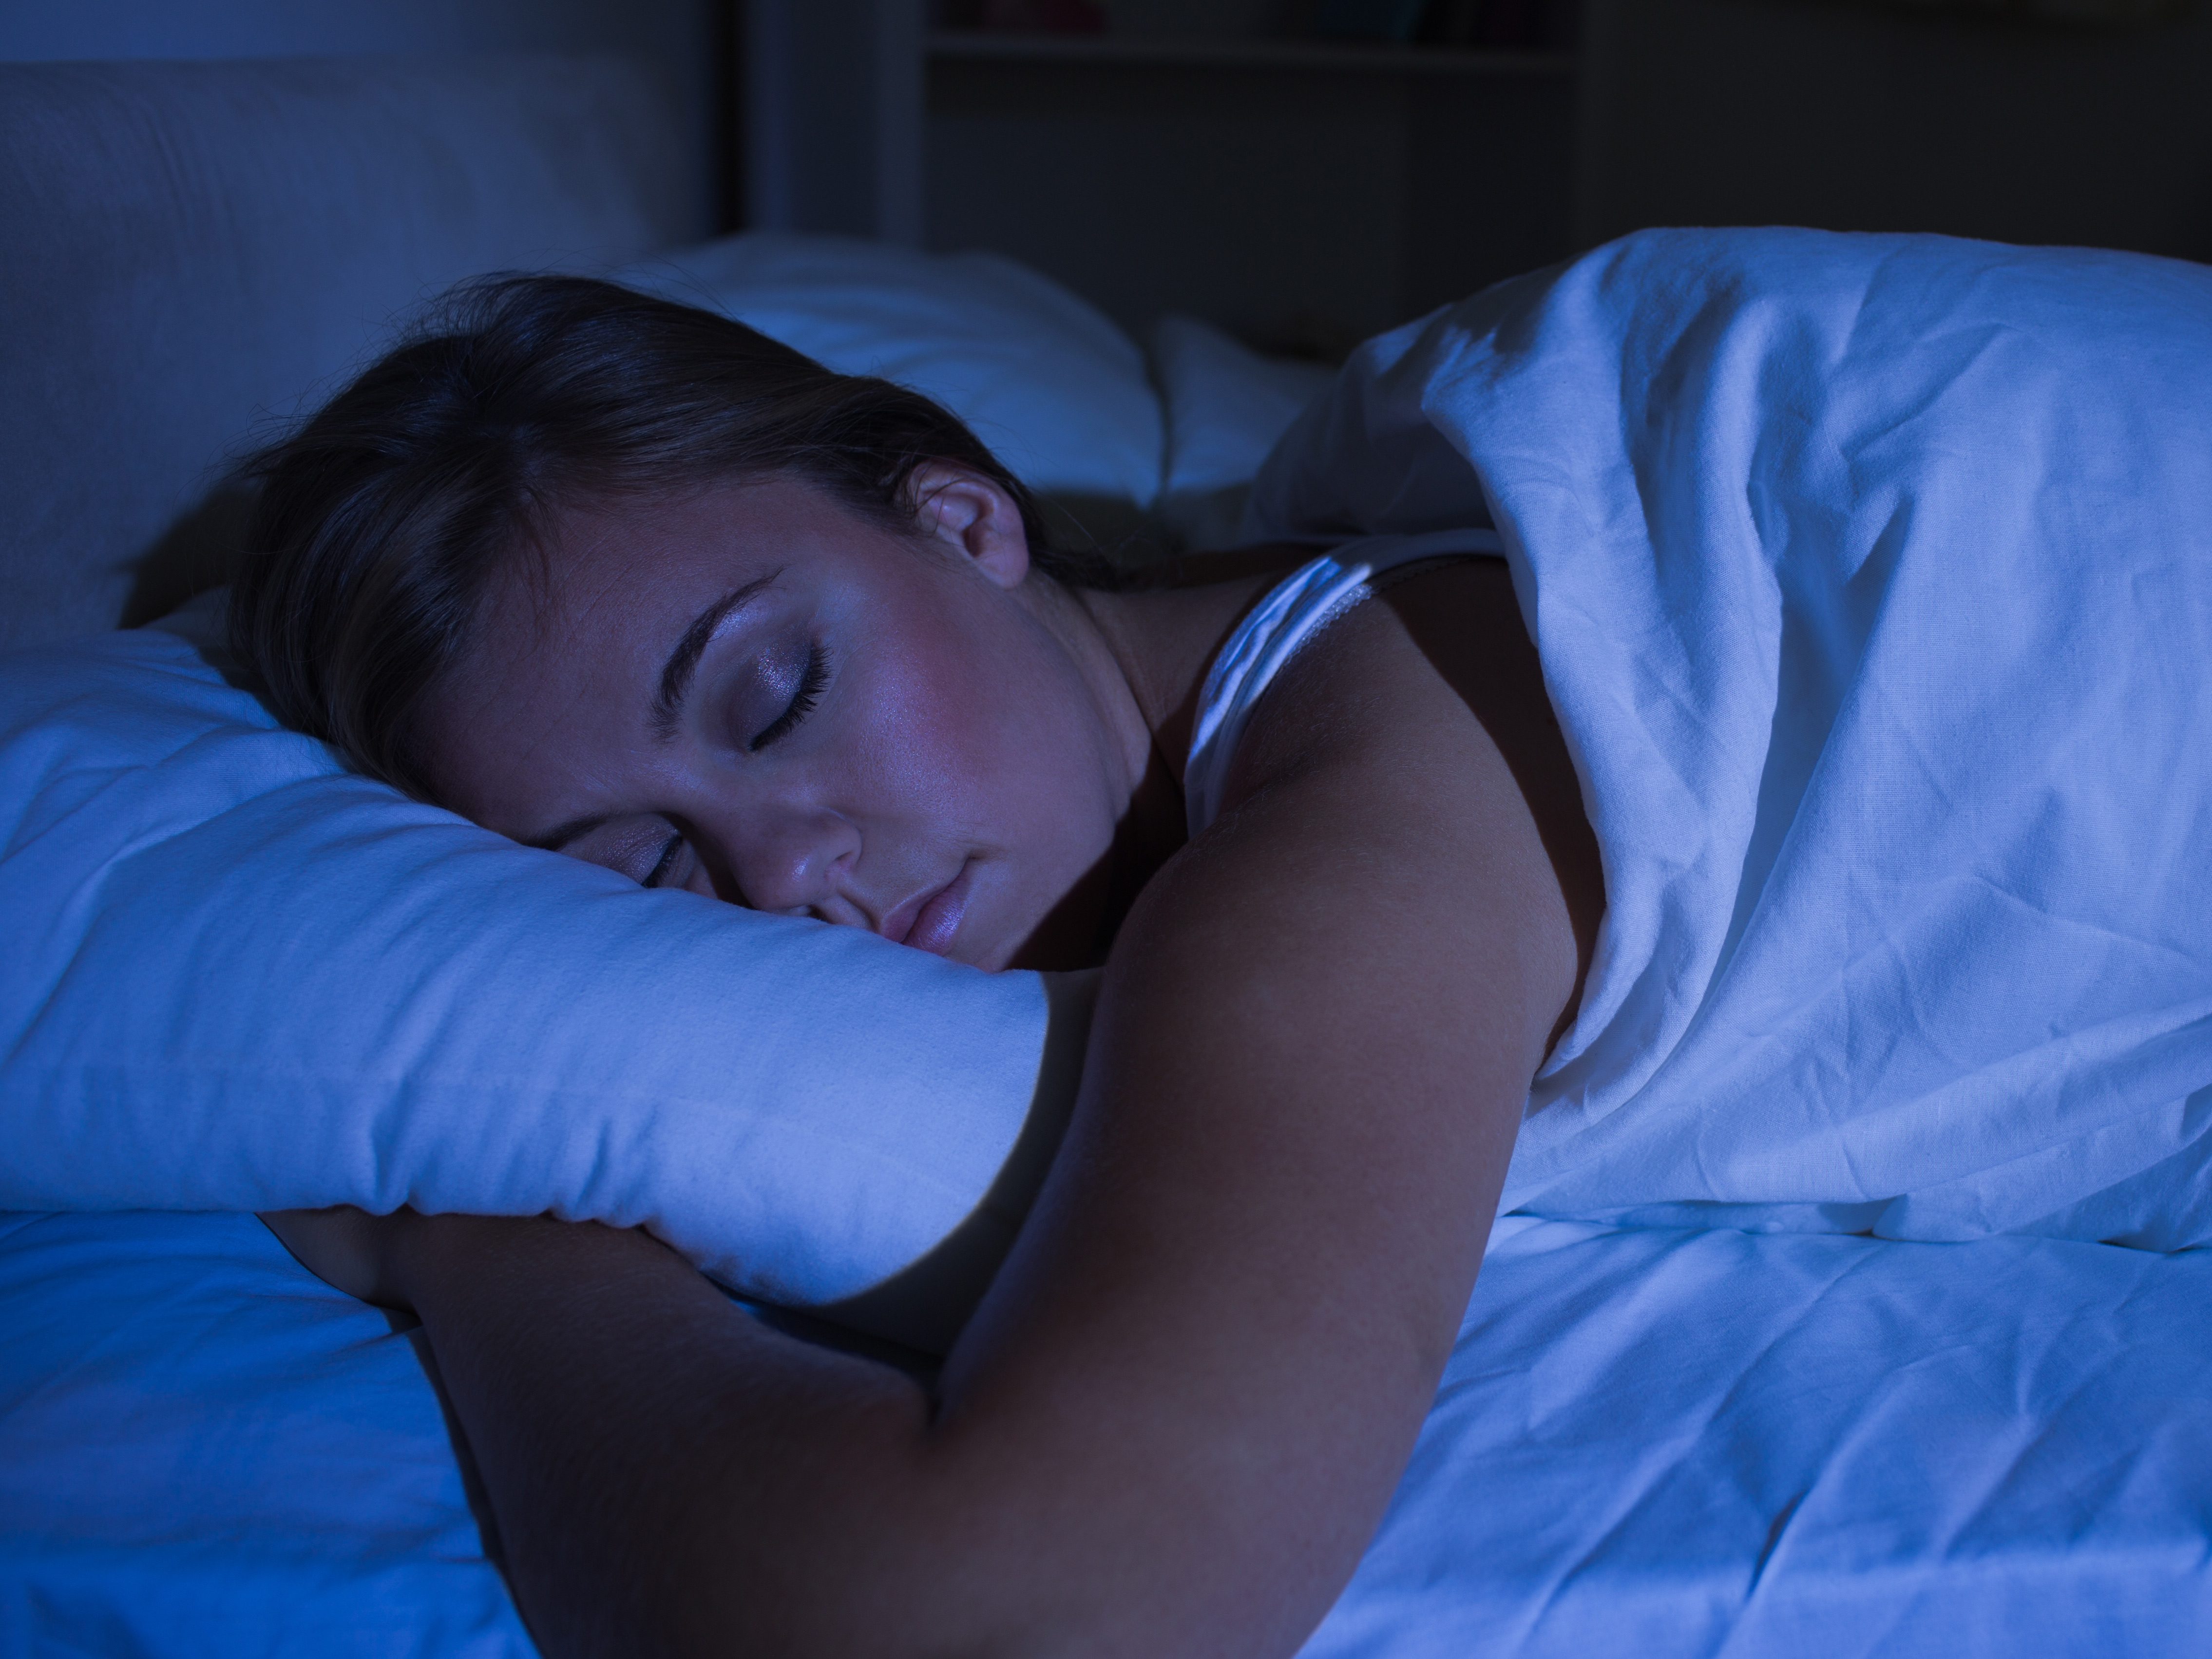 Ditch deadly sleep aids for natural sweet dreams